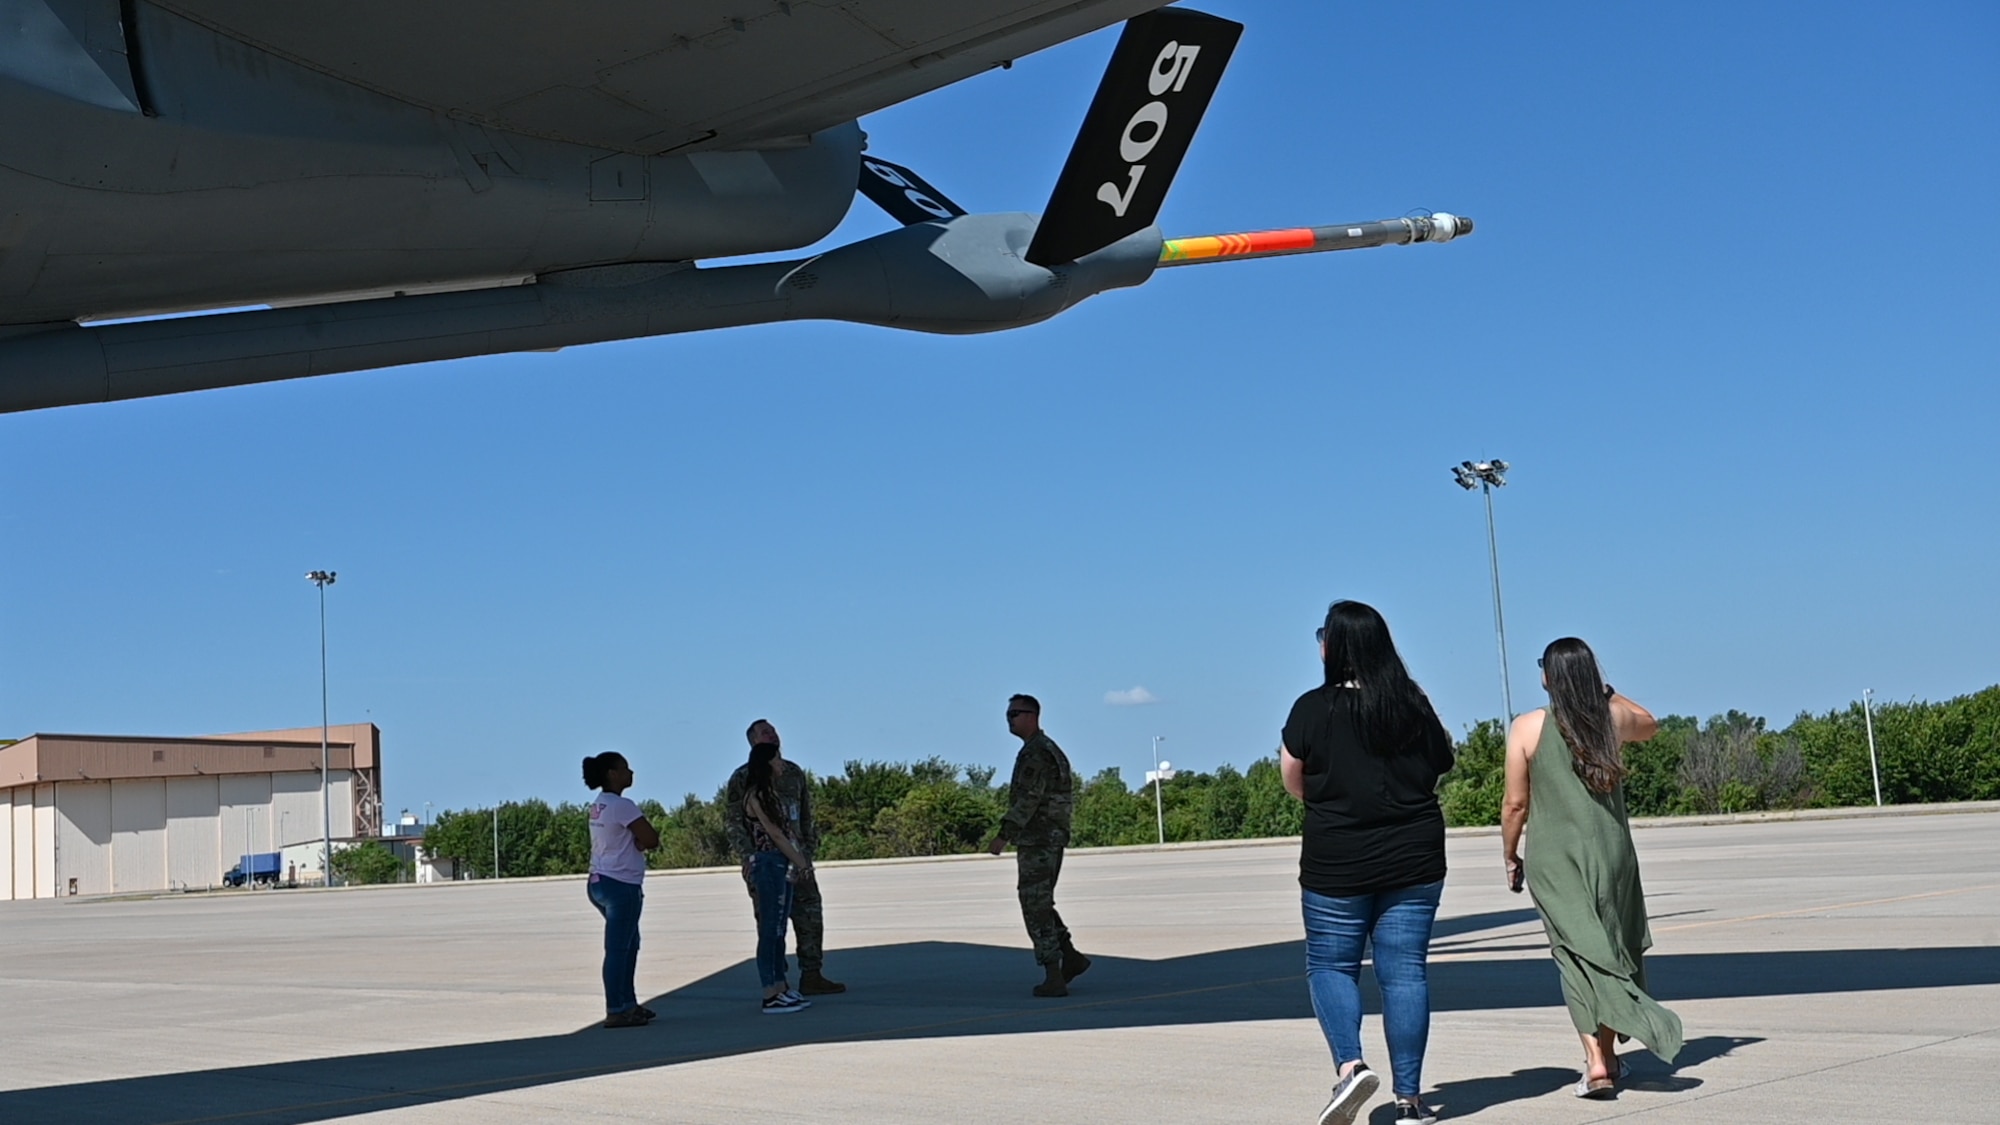 people stand under the tail of a plane